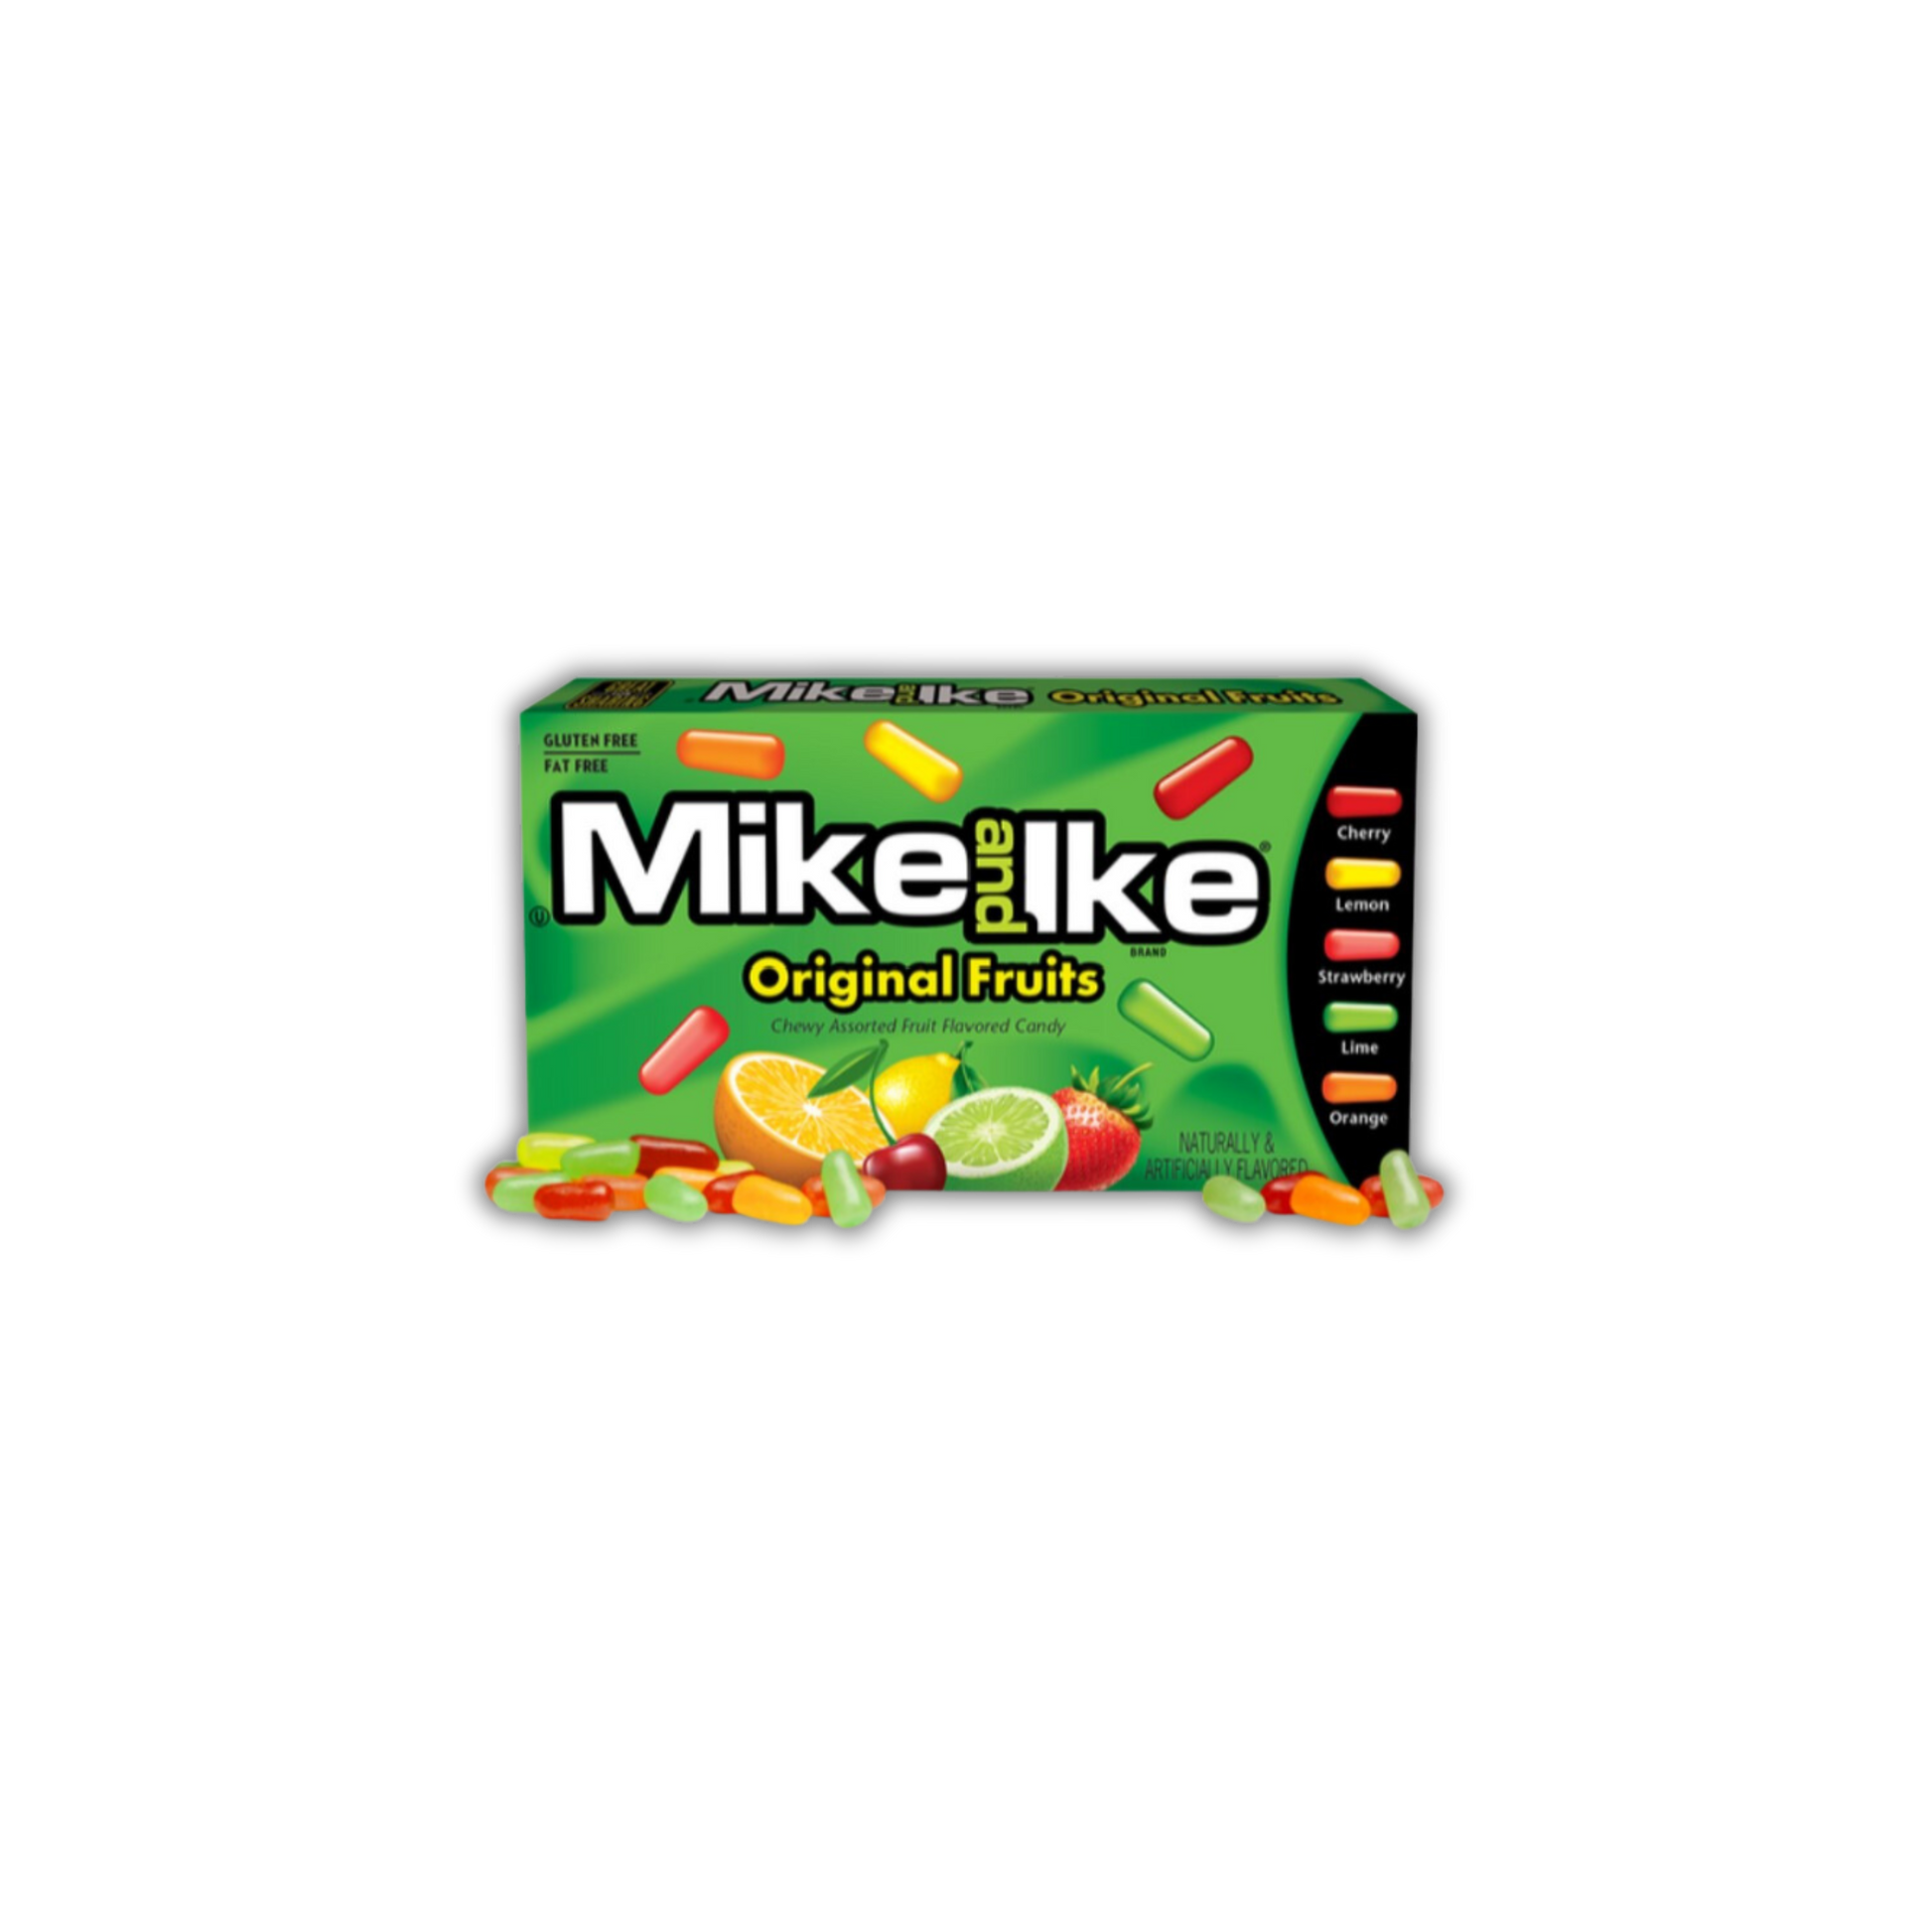 Mike and Ike Original Fruits Theatre Box